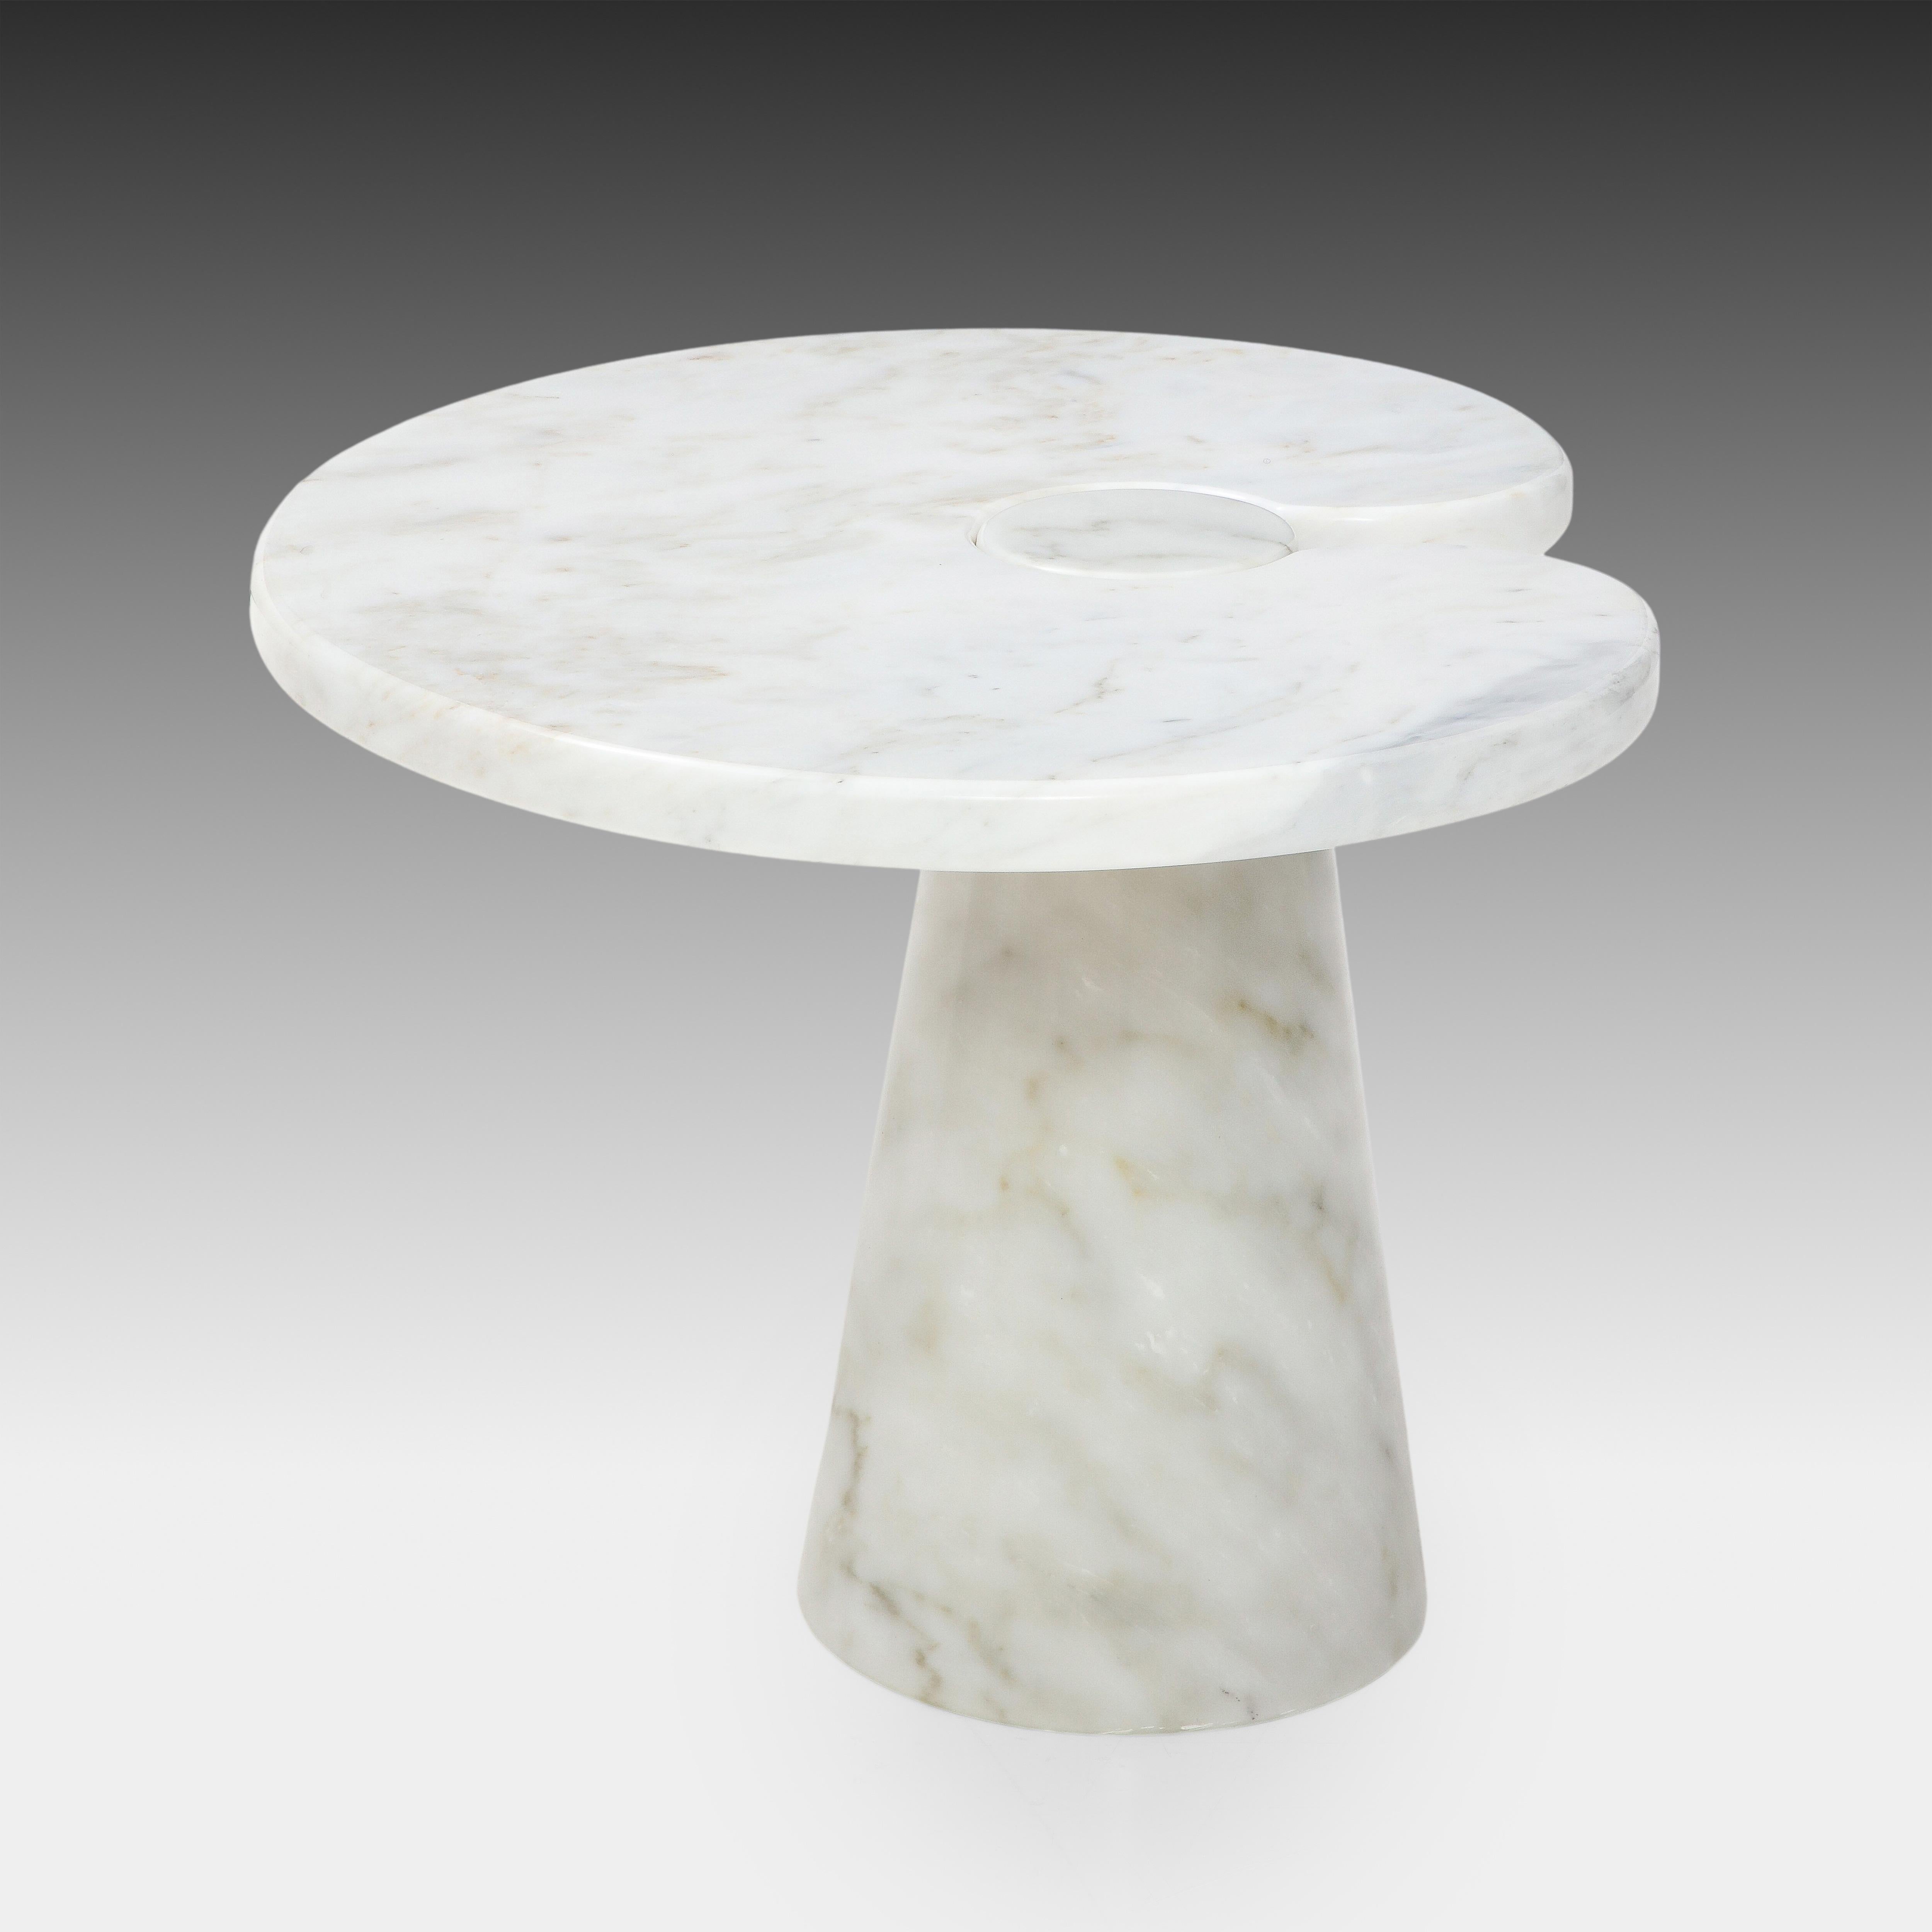 Polished Angelo Mangiarotti Carrara Marble Side Table from 'Eros' Series, 1971 For Sale